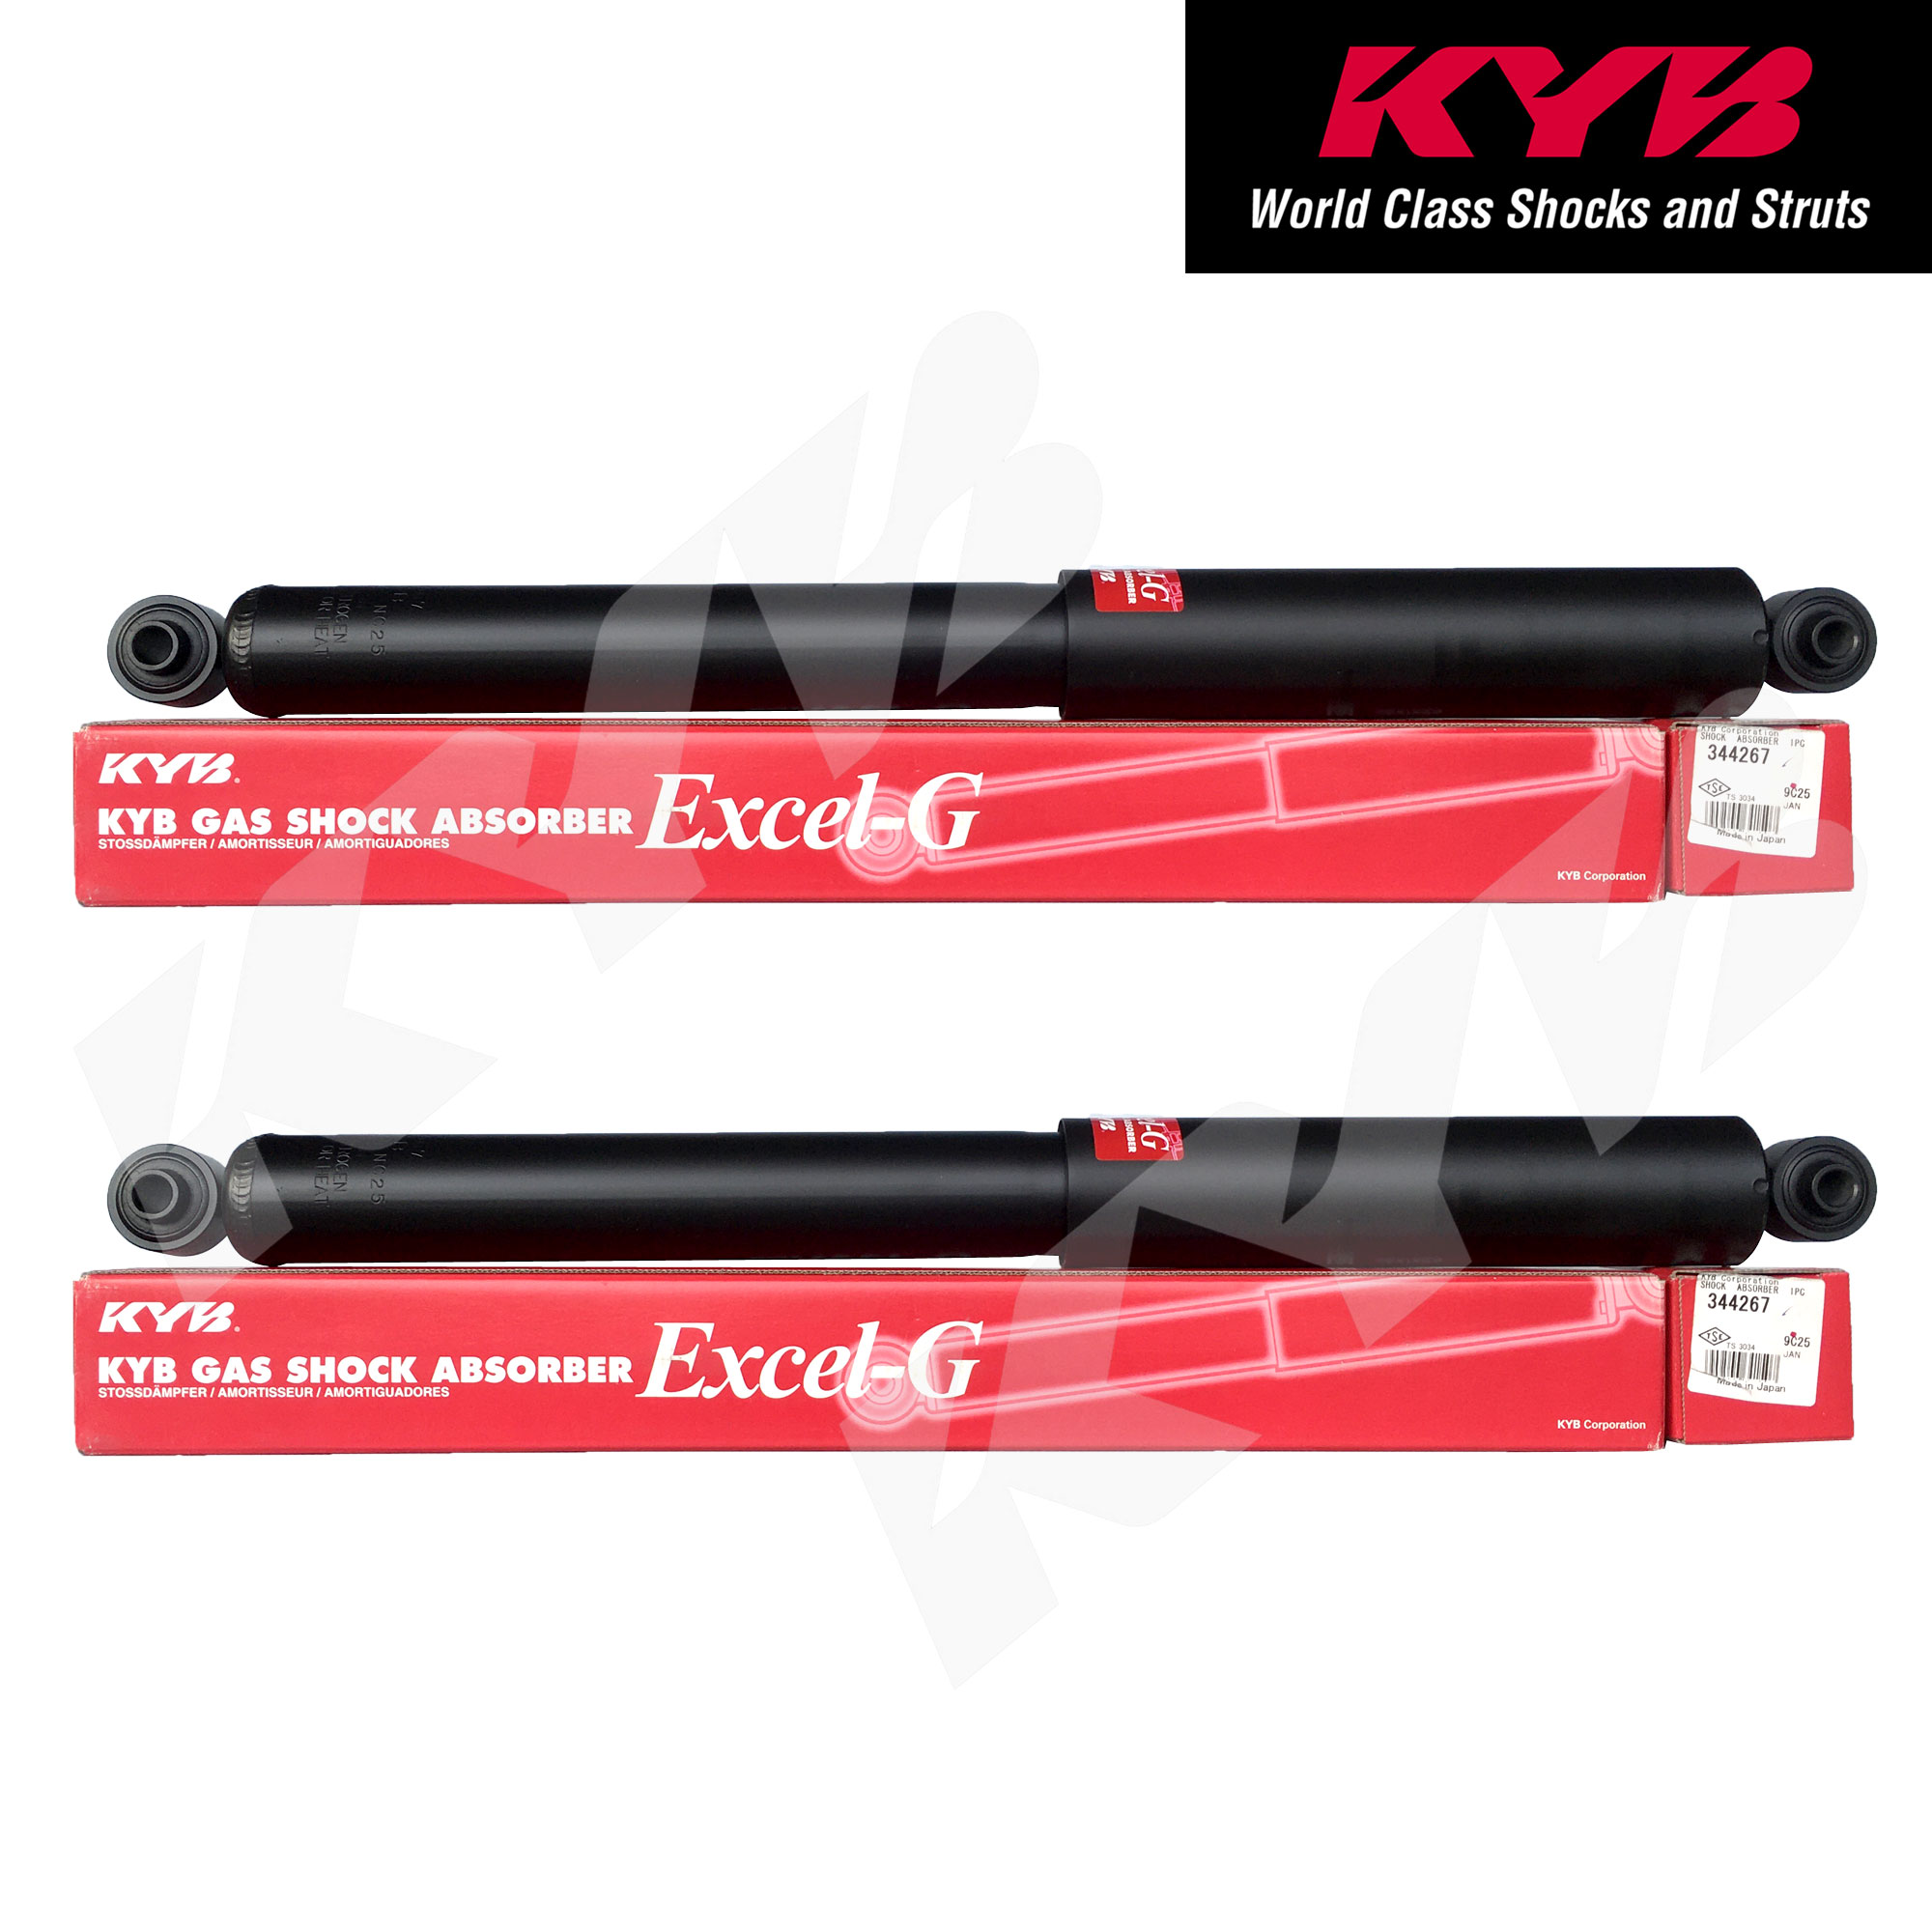 KYB 344267 for Ford Expedition 4x2 and 4x4 1997 - 2002 Set of 2